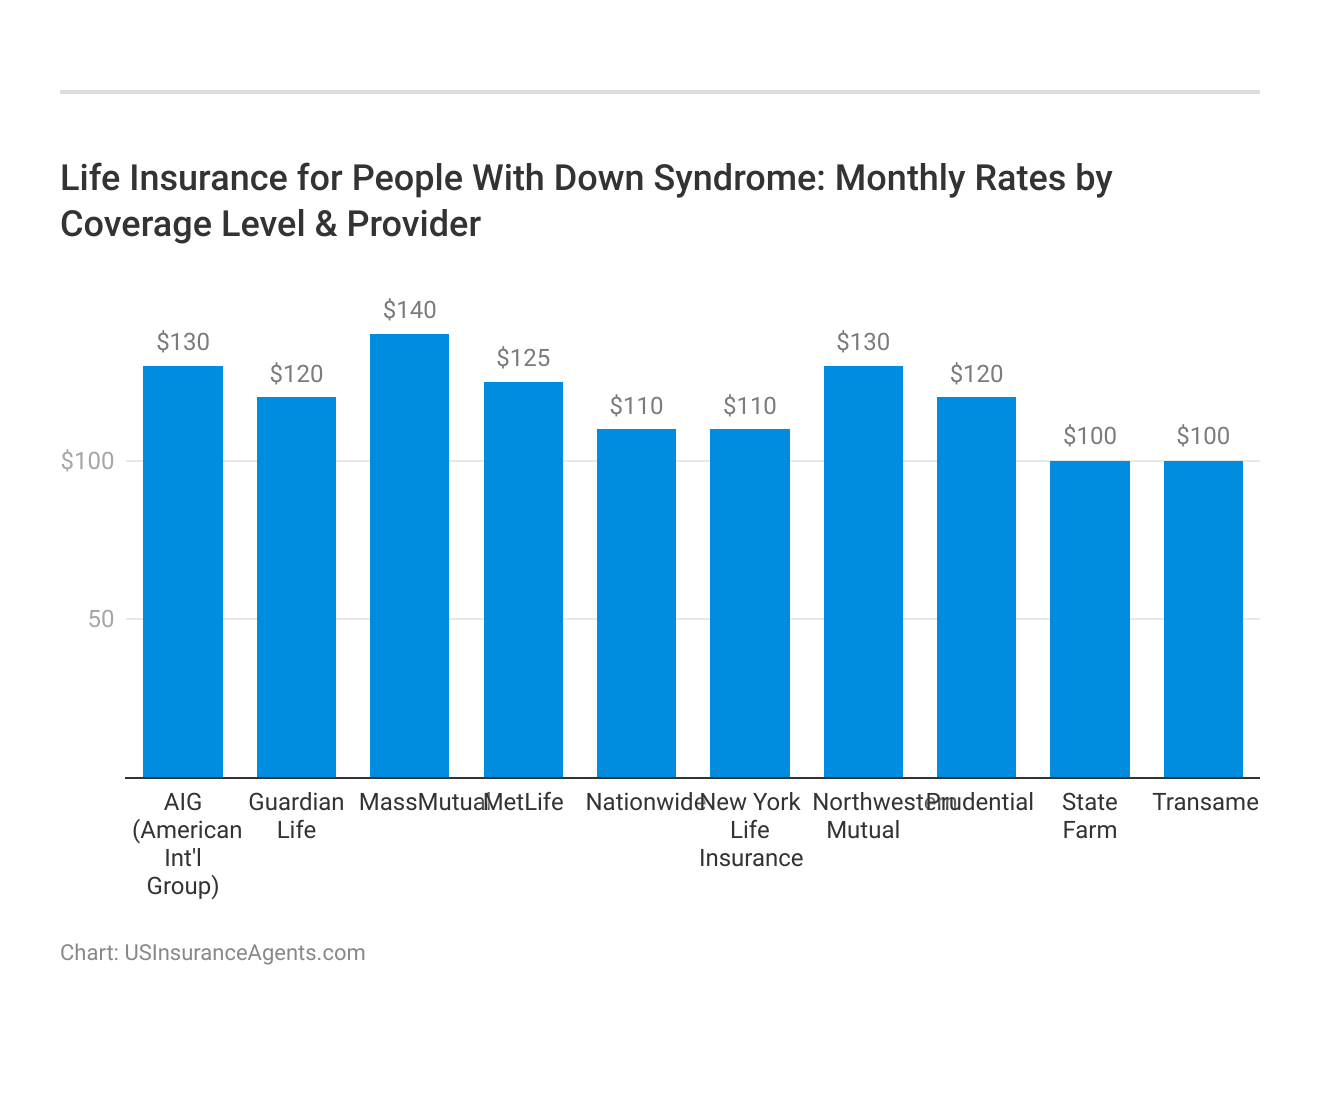 <h3>Life Insurance for People With Down Syndrome: Monthly Rates by Coverage Level & Provider</h3>